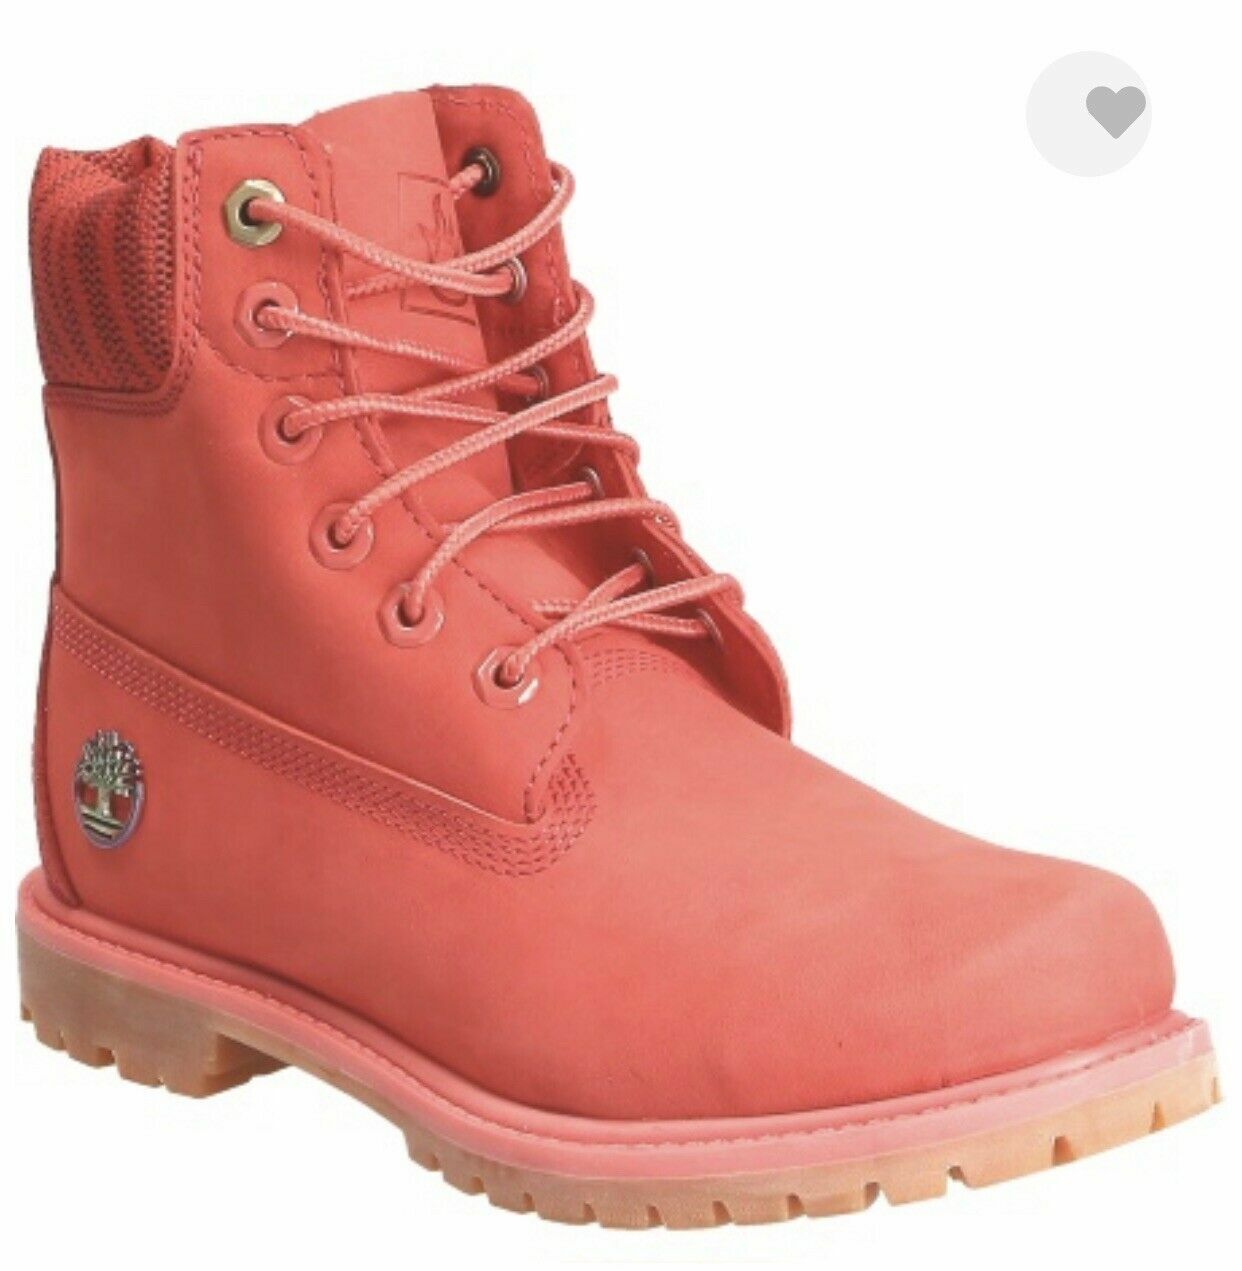 Primary image for Timberland Women 6"Inch LIMITED EDITION Dark Pink Waterproof Double Boot A1WFJ